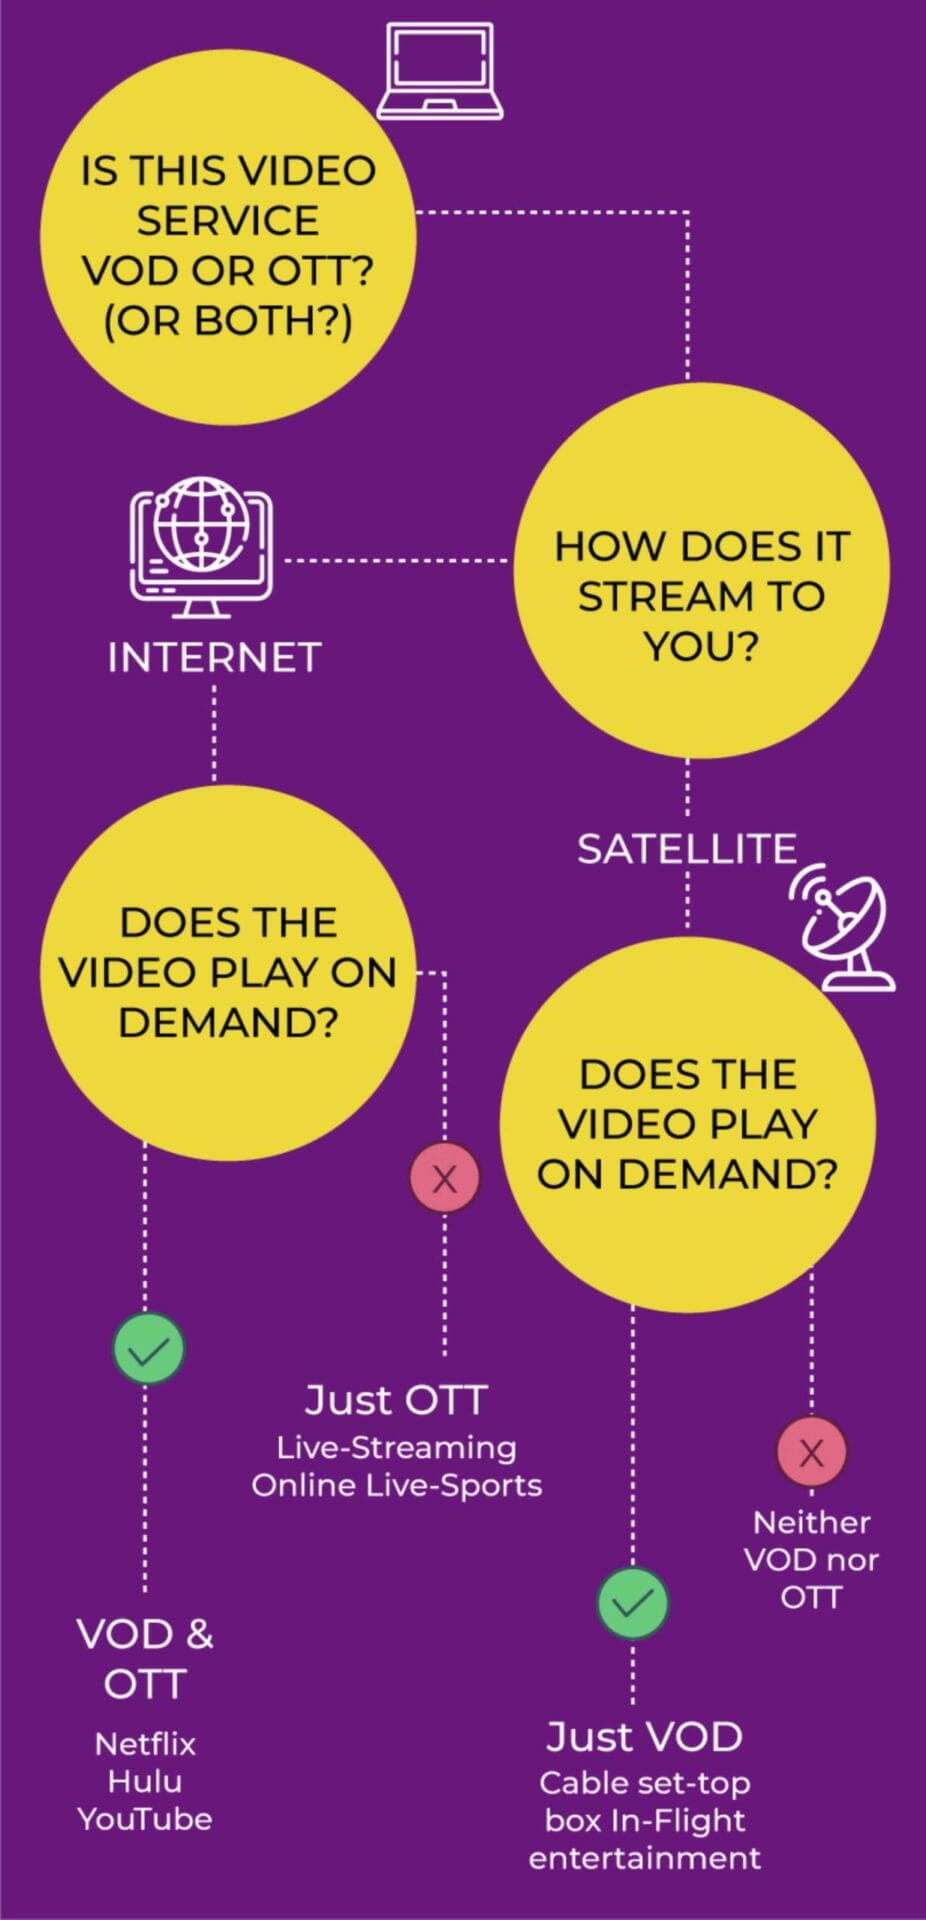 Difference between Video on Demand (VOD) and Over the top (OTT) videos